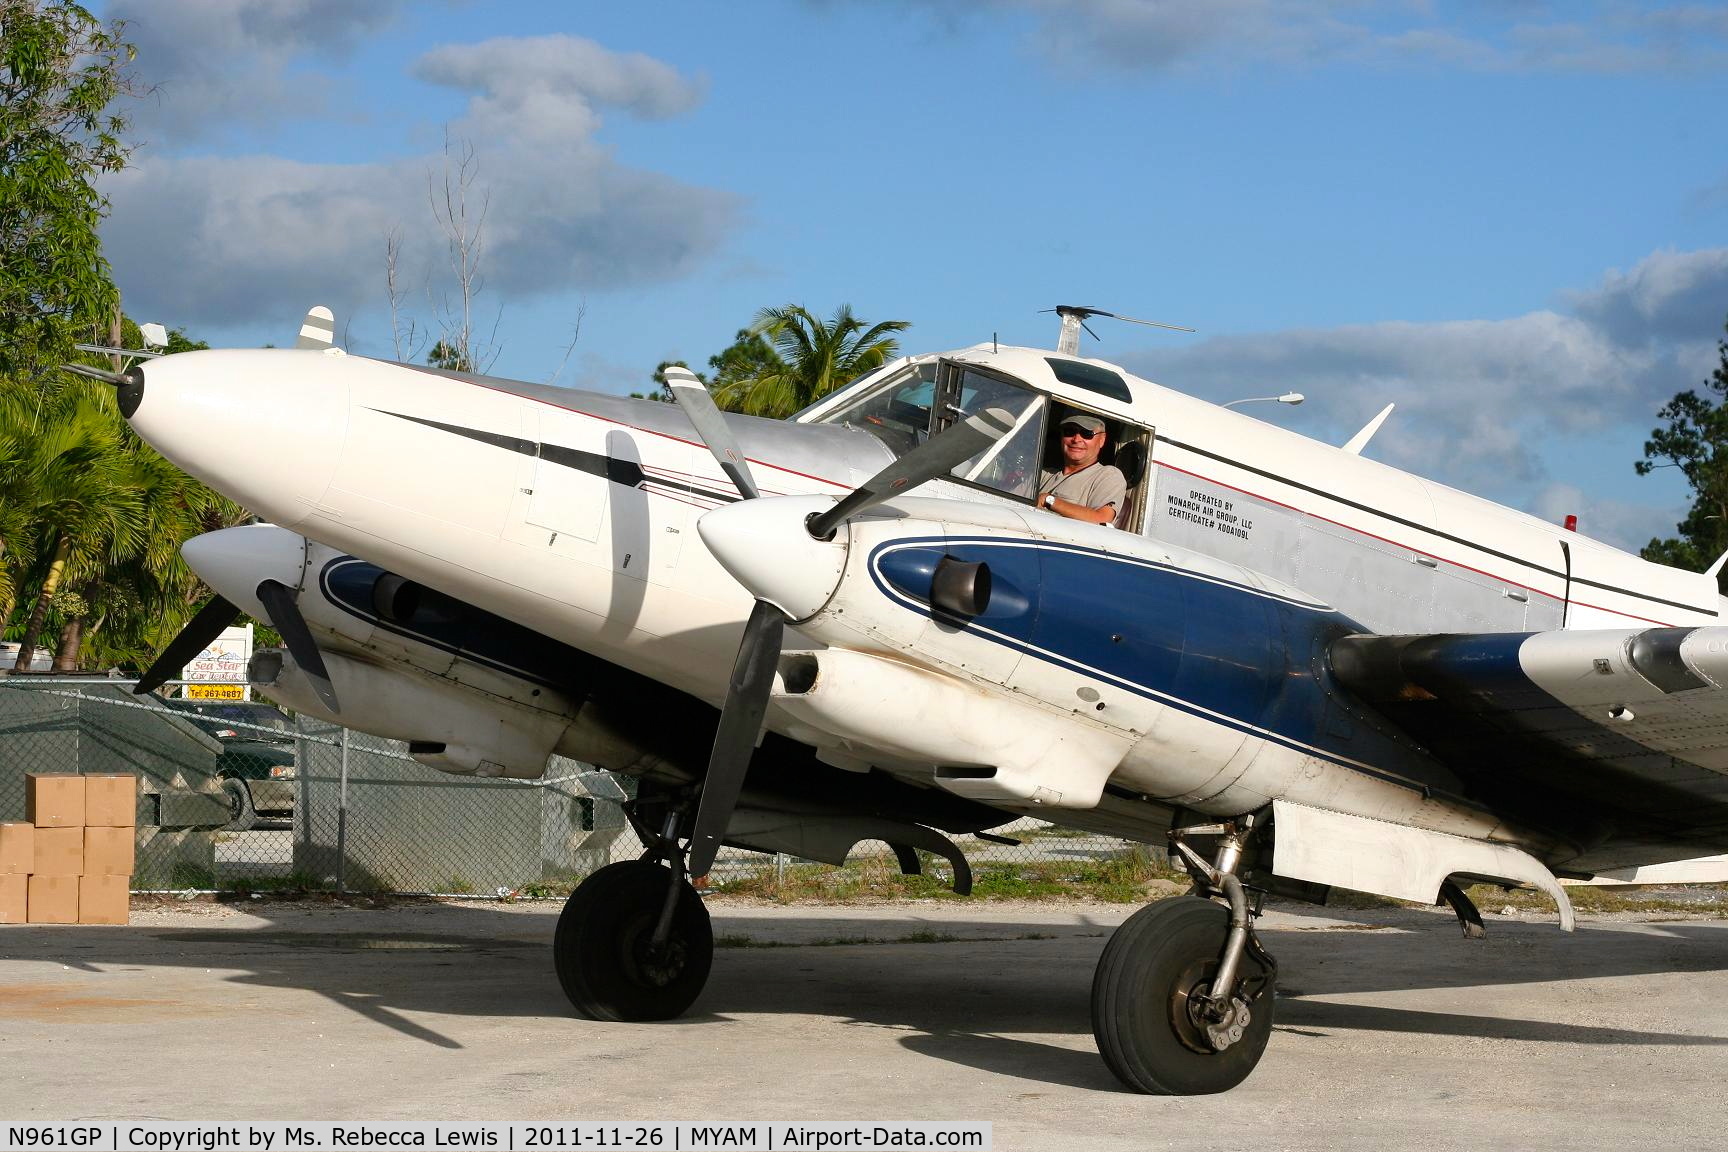 N961GP, 1961 Beech-Hamilton G18S Westwind III C/N BA-559, Flight to Marsh Harbor, Abacos Bahamas to delver the bi-monthly Abacos news paper.